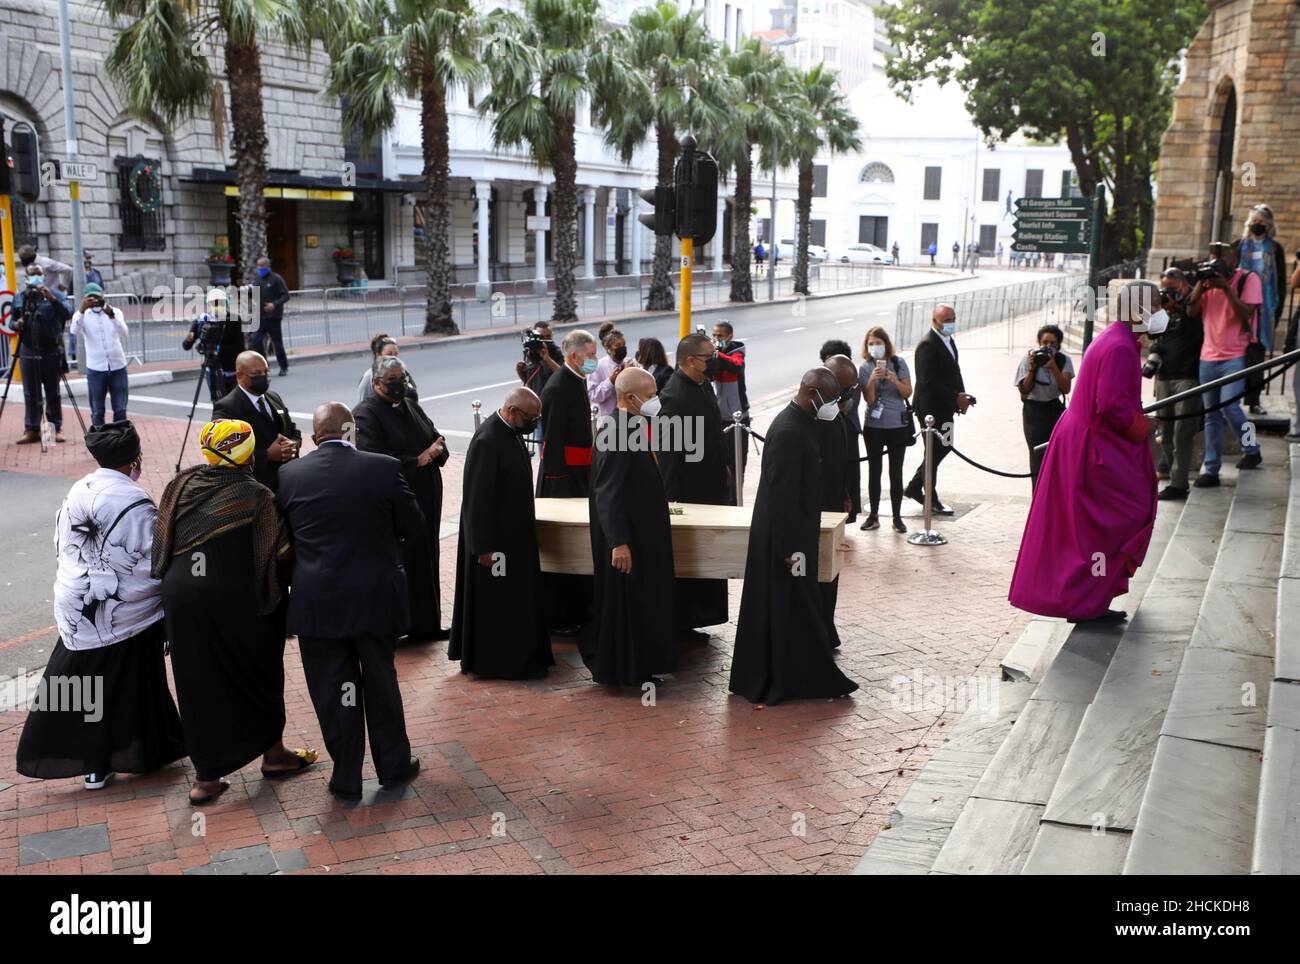 Archbishop of Cape Town Thabo Makgoba walks in front of the casket containing the body of Archbishop Desmond Tutu during arrival at St Georges cathedral for his lying in state, in Cape Town, South Africa, December 30, 2021.  REUTERS/Mike Hutchings Stock Photo